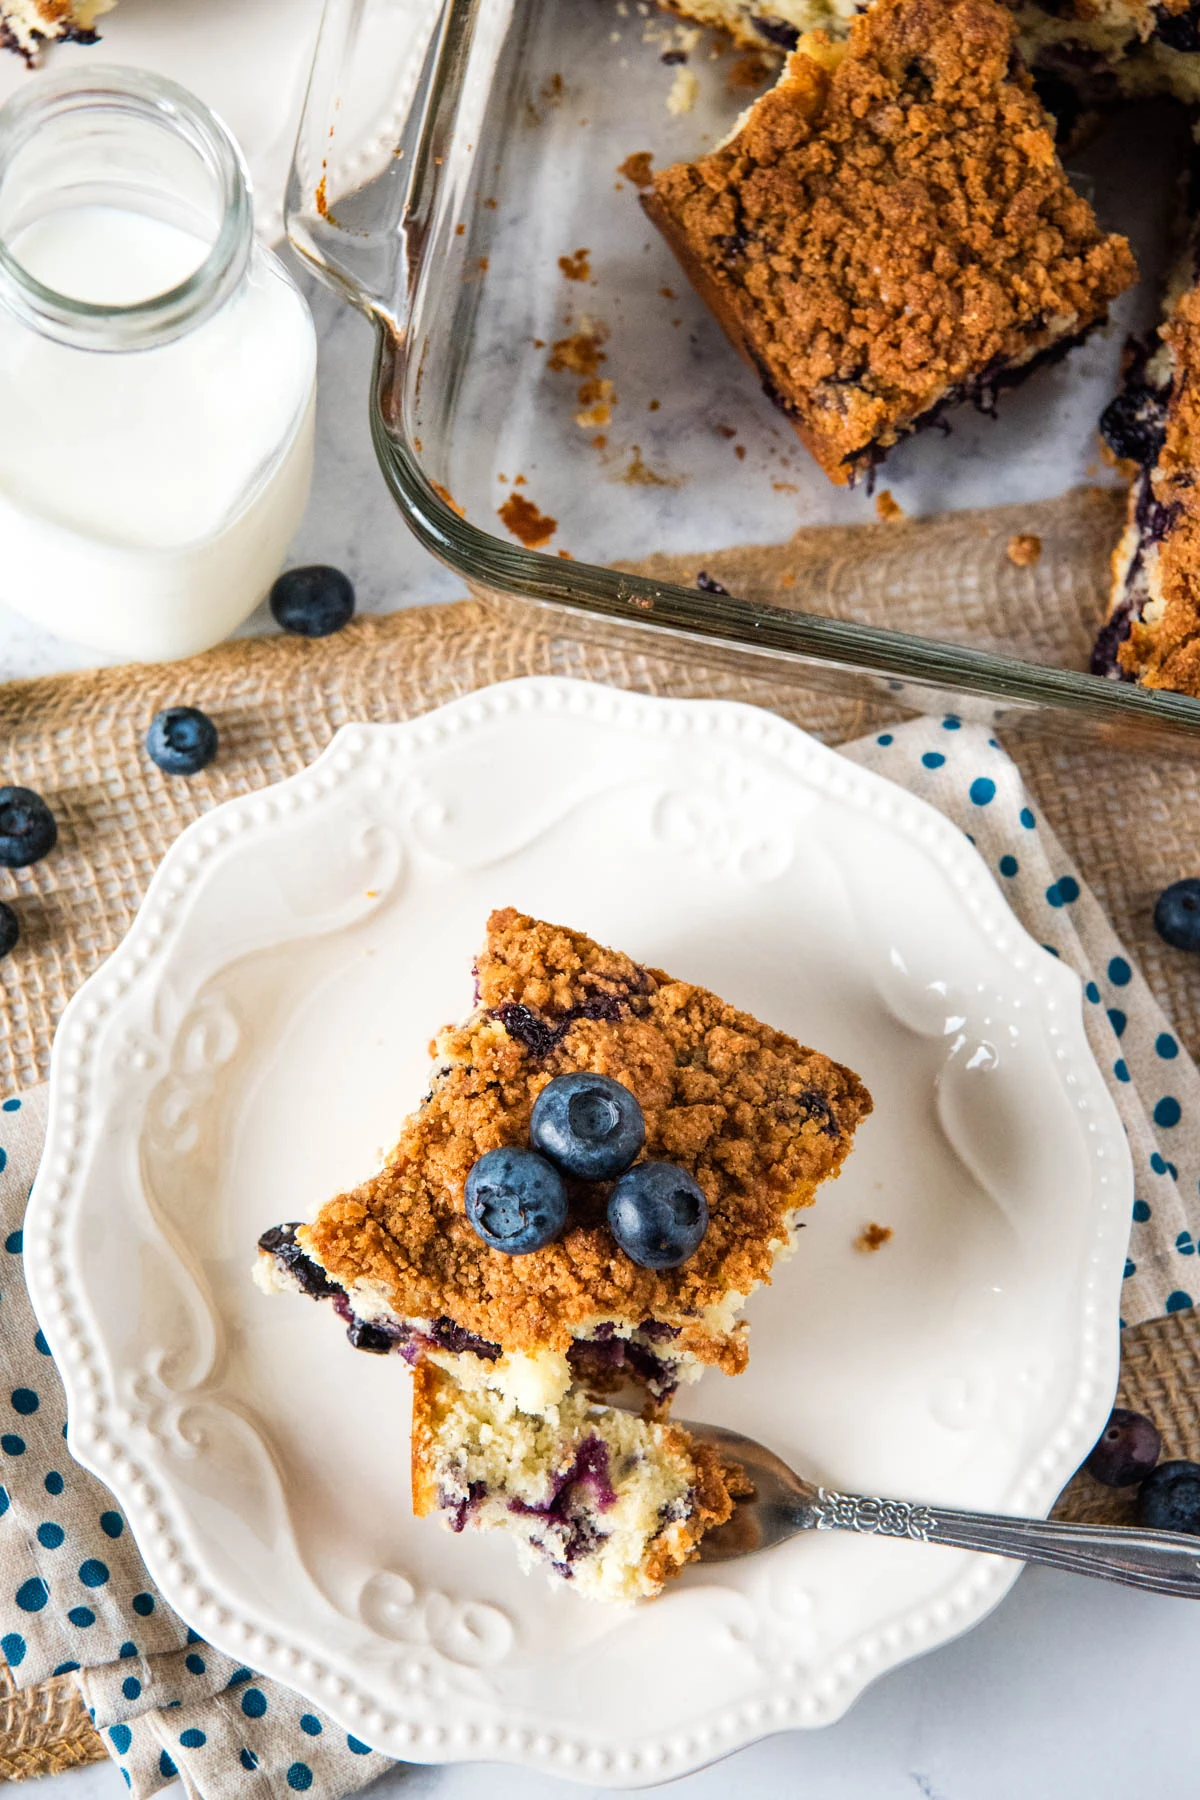 sliced square of blueberry coffee cake with a bite on a small silver fork on a small white saucer on a white and blue polka dot towel next to a large glass baking dish full of cake